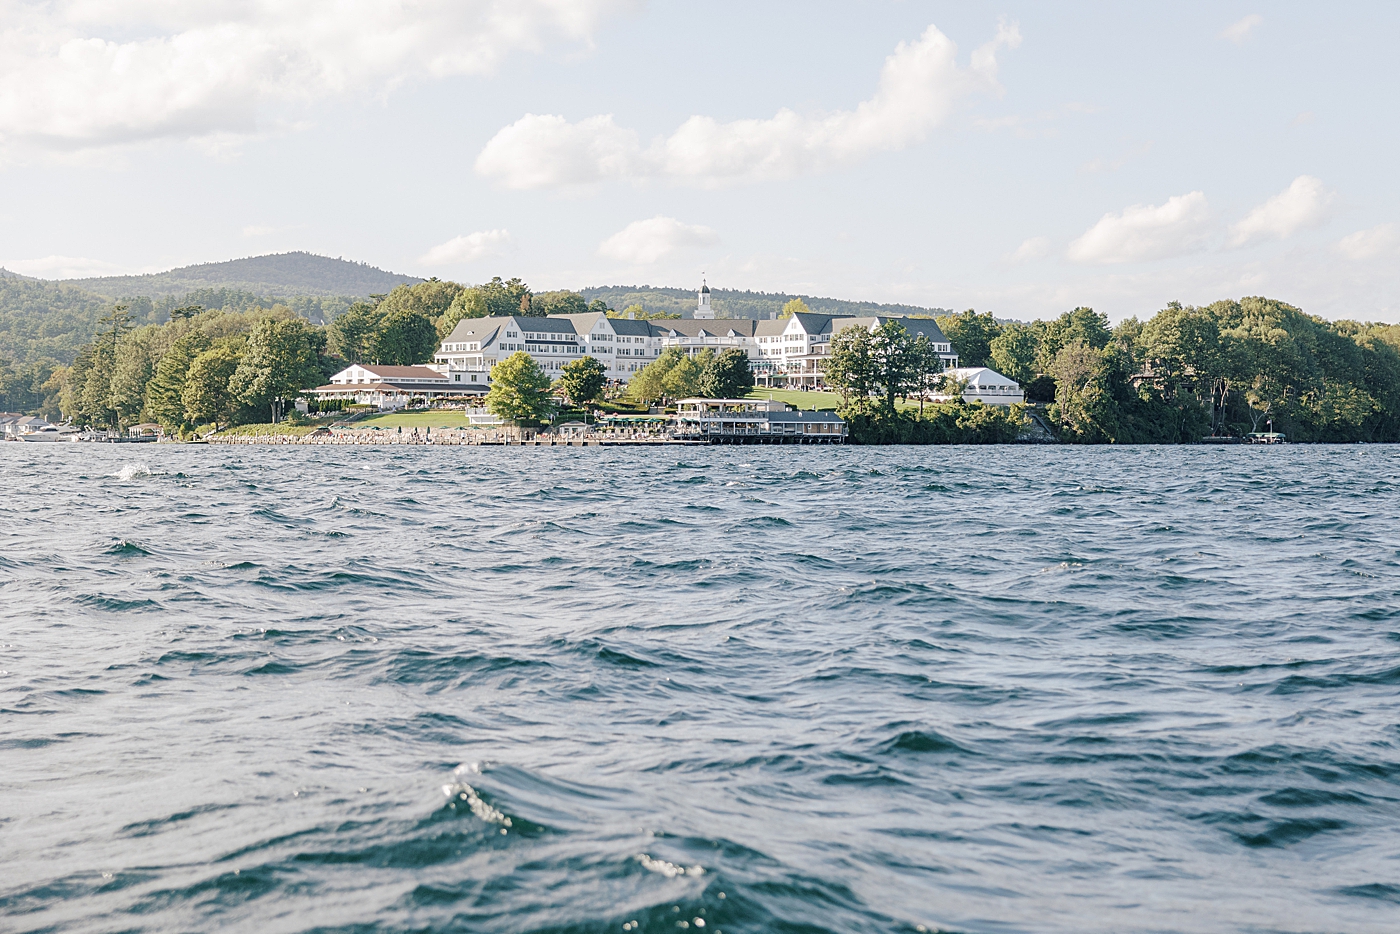 Location image of the venue from a boat on the water | Image by Hope Helmuth Photography